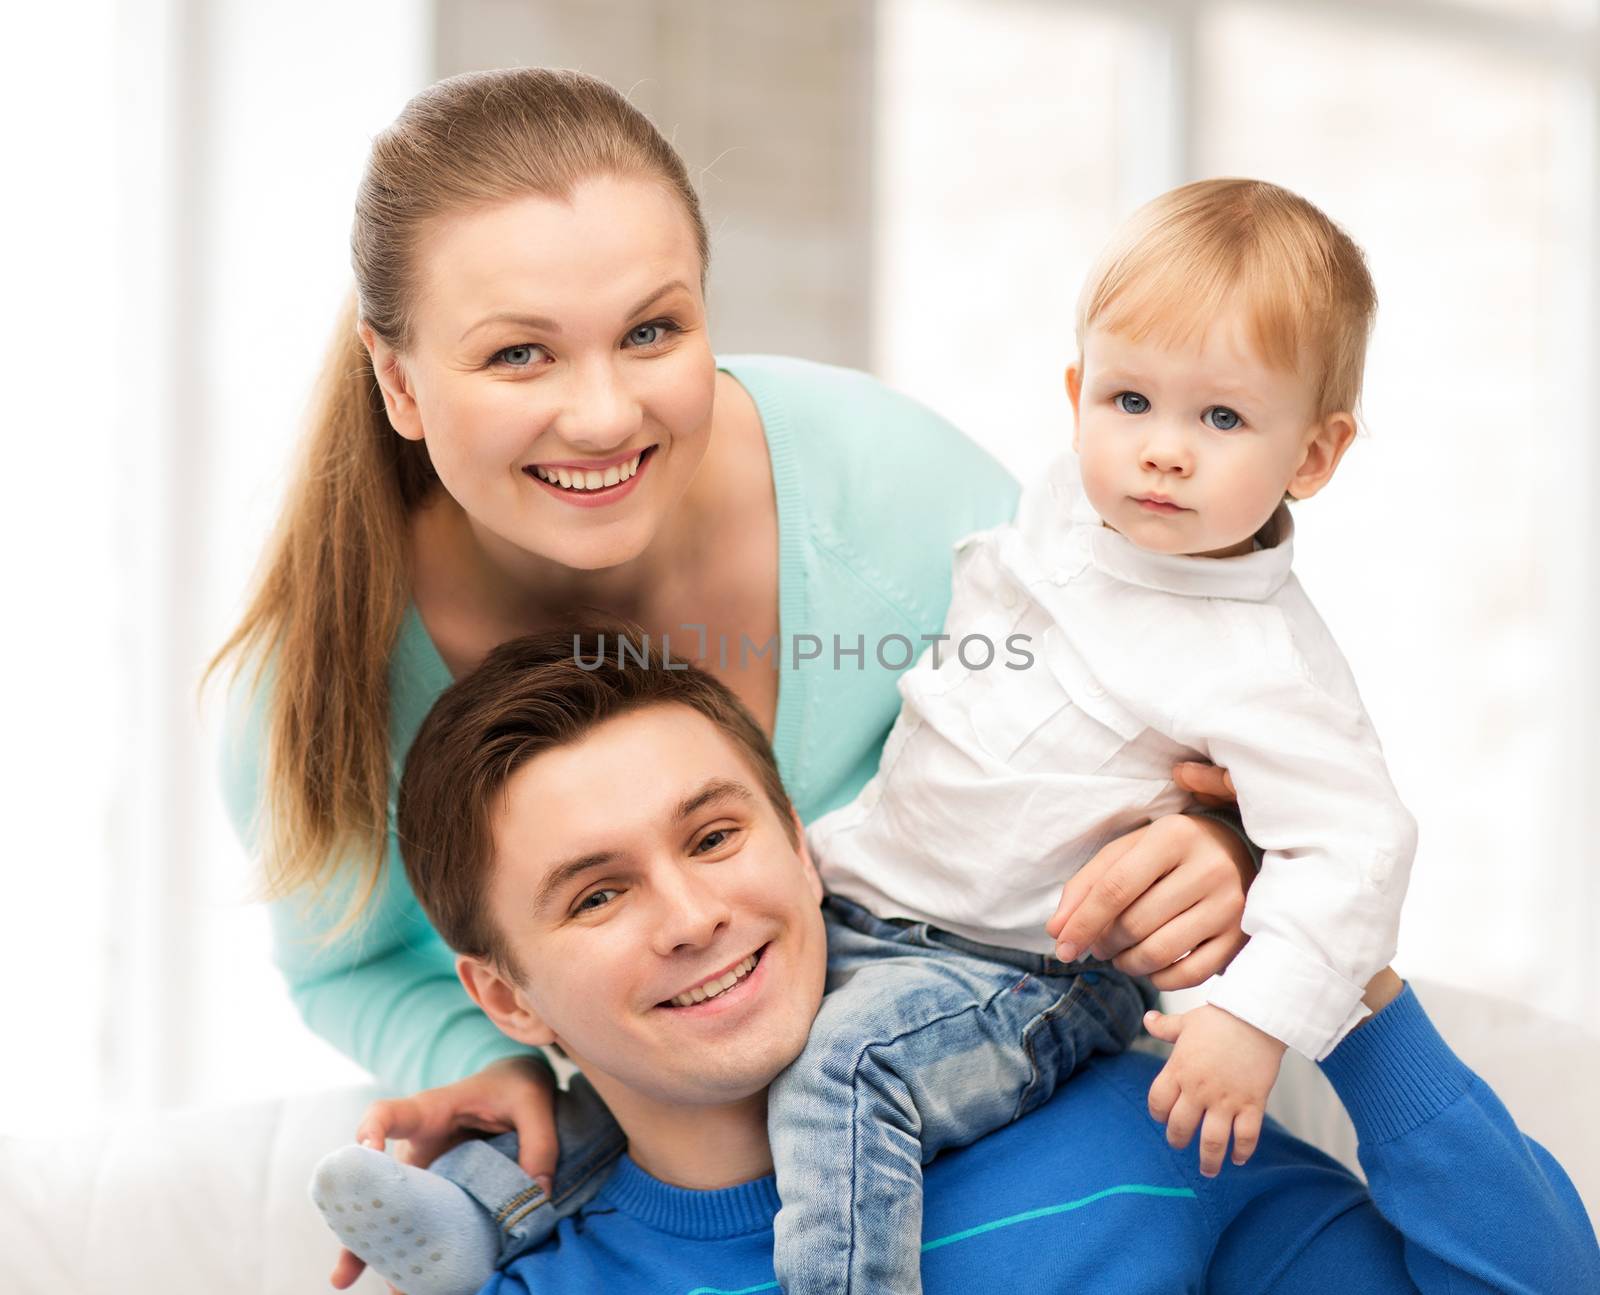 picture of happy parents playing with adorable baby